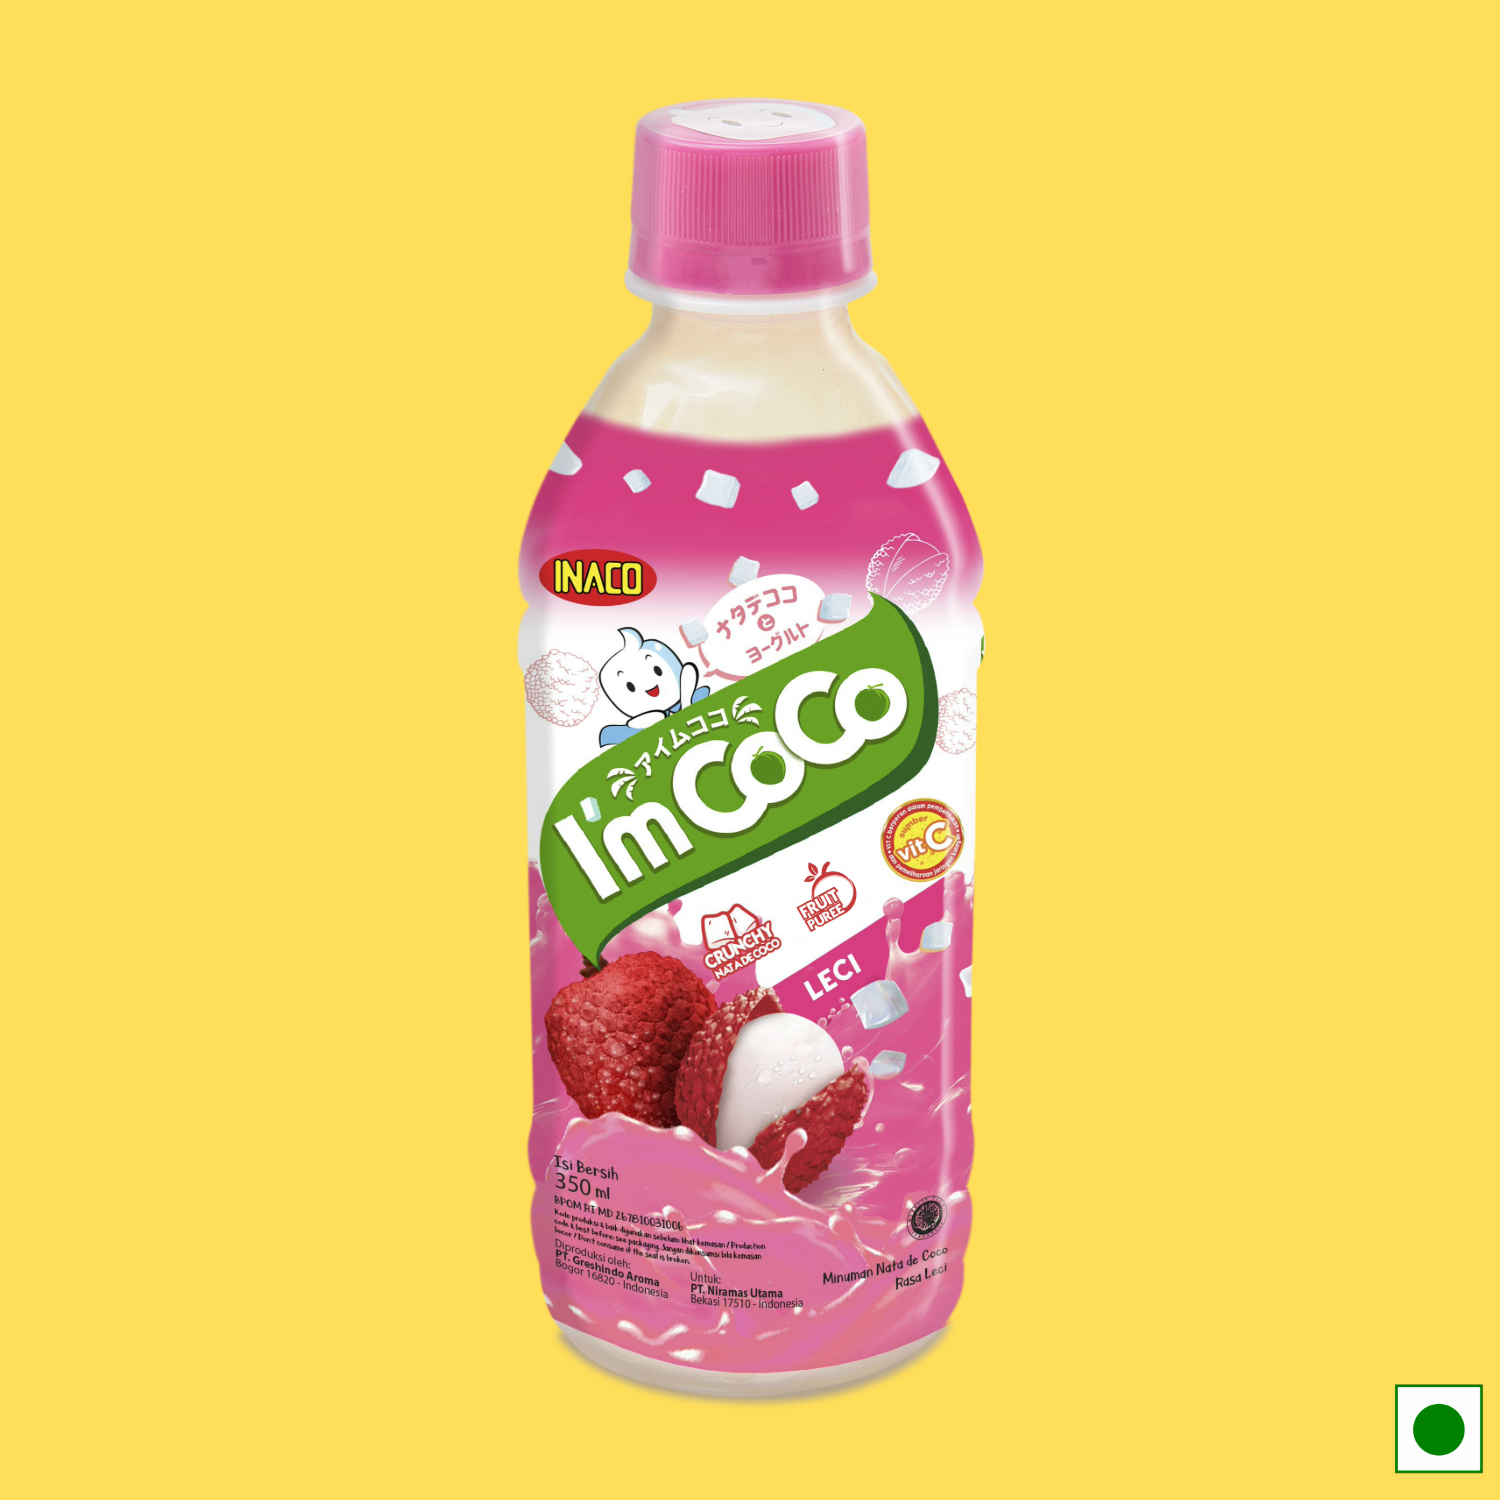 INACO I'm Coco Lychee, 350ml (Imported)